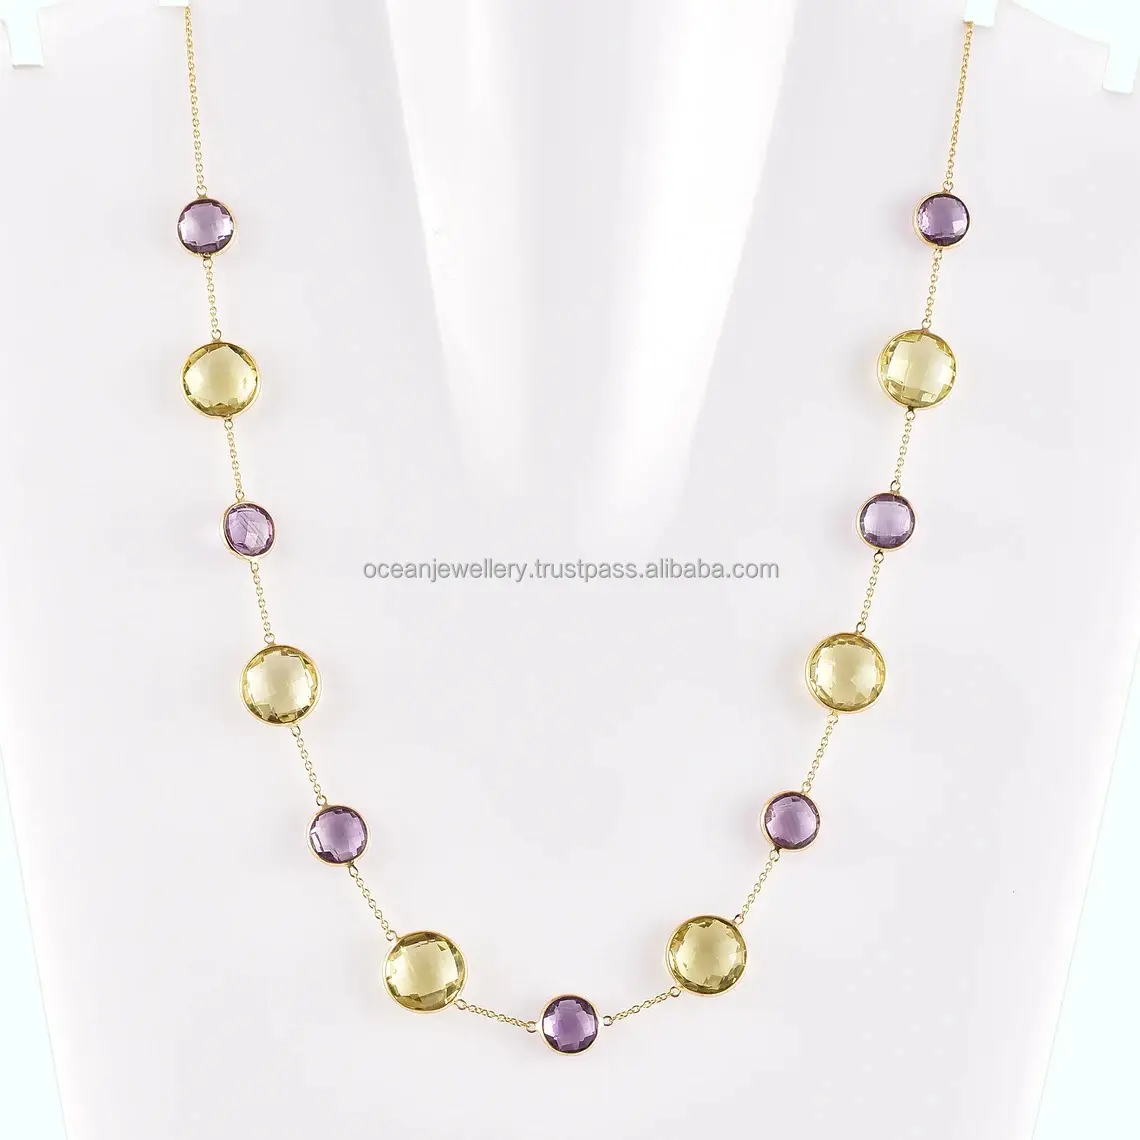 Wholesale 18k Yellow Gold With Amethyst And Lemon Chain Necklace Amethyst Gemstone Necklace Stone Gold Necklace For Women